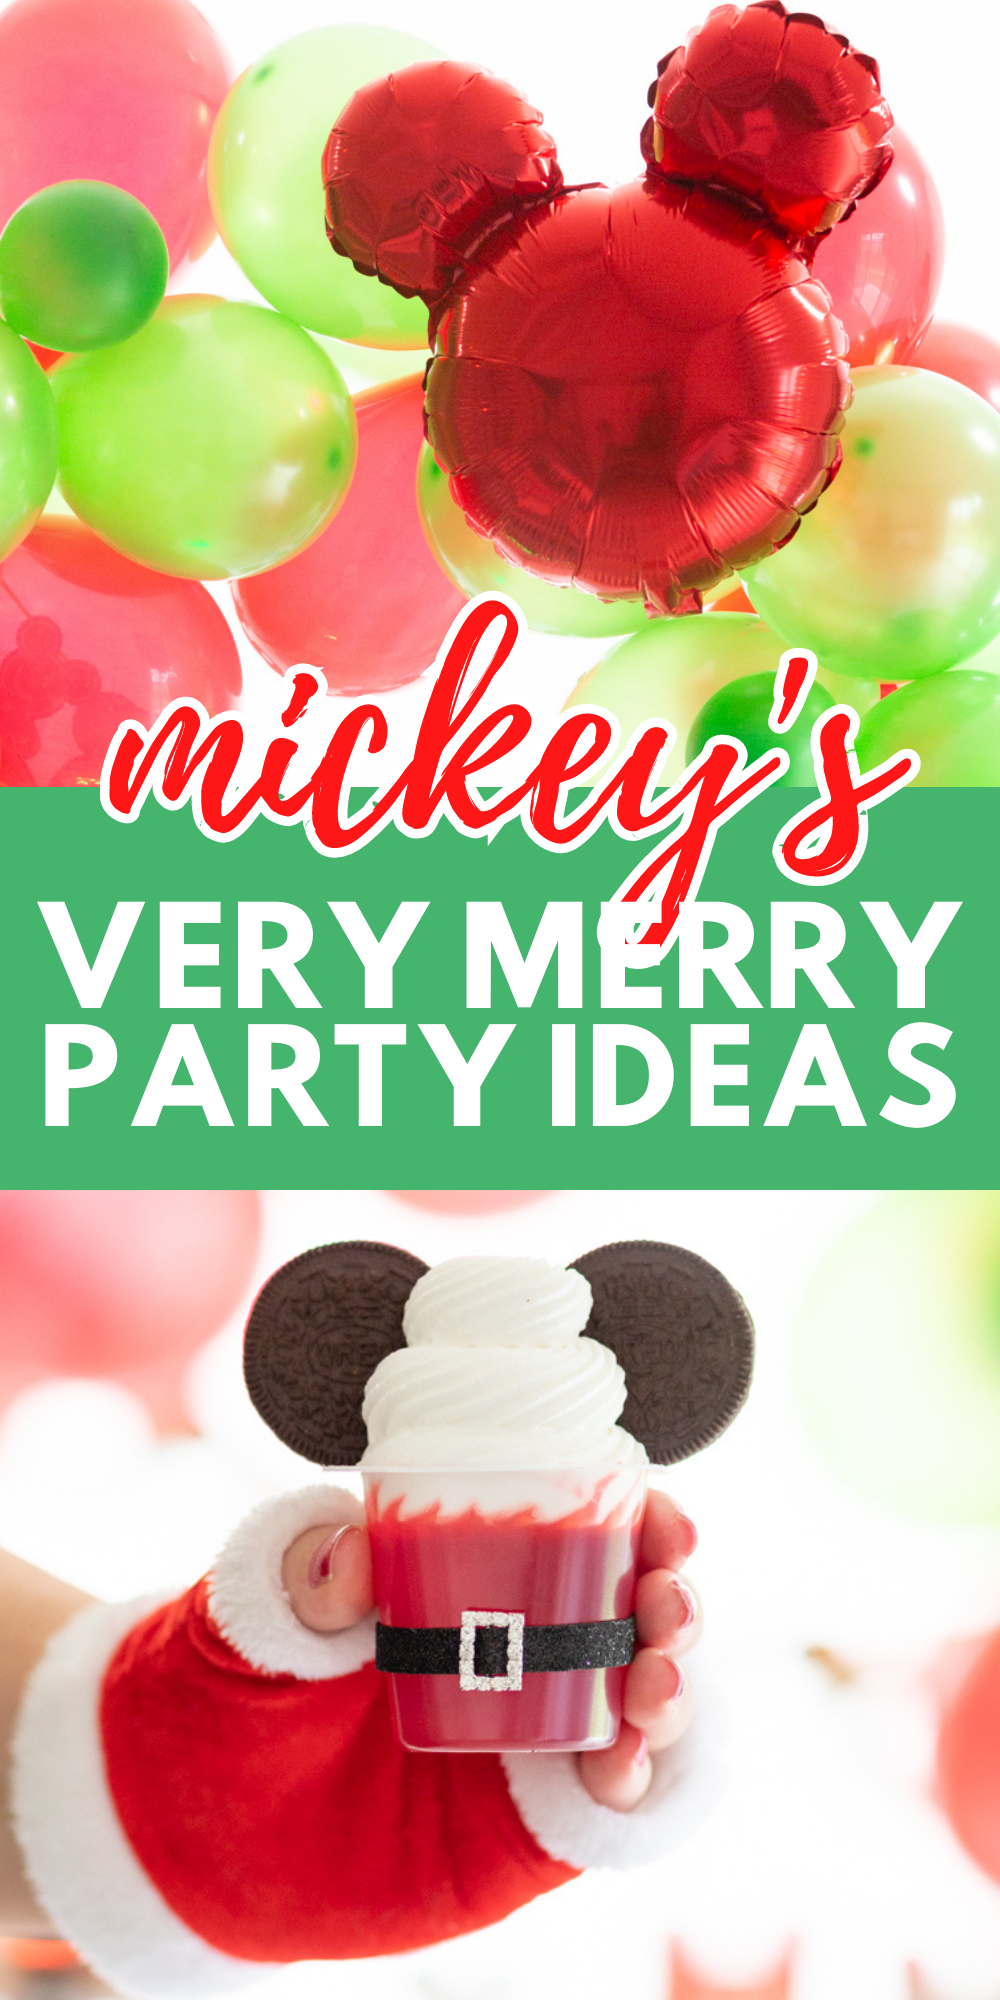 Mickey's Very Merry Christmas Party Inspired Ideas with Mickey themed Balloon Arch and the cutest and easiest Mickey foods and recipes to make.